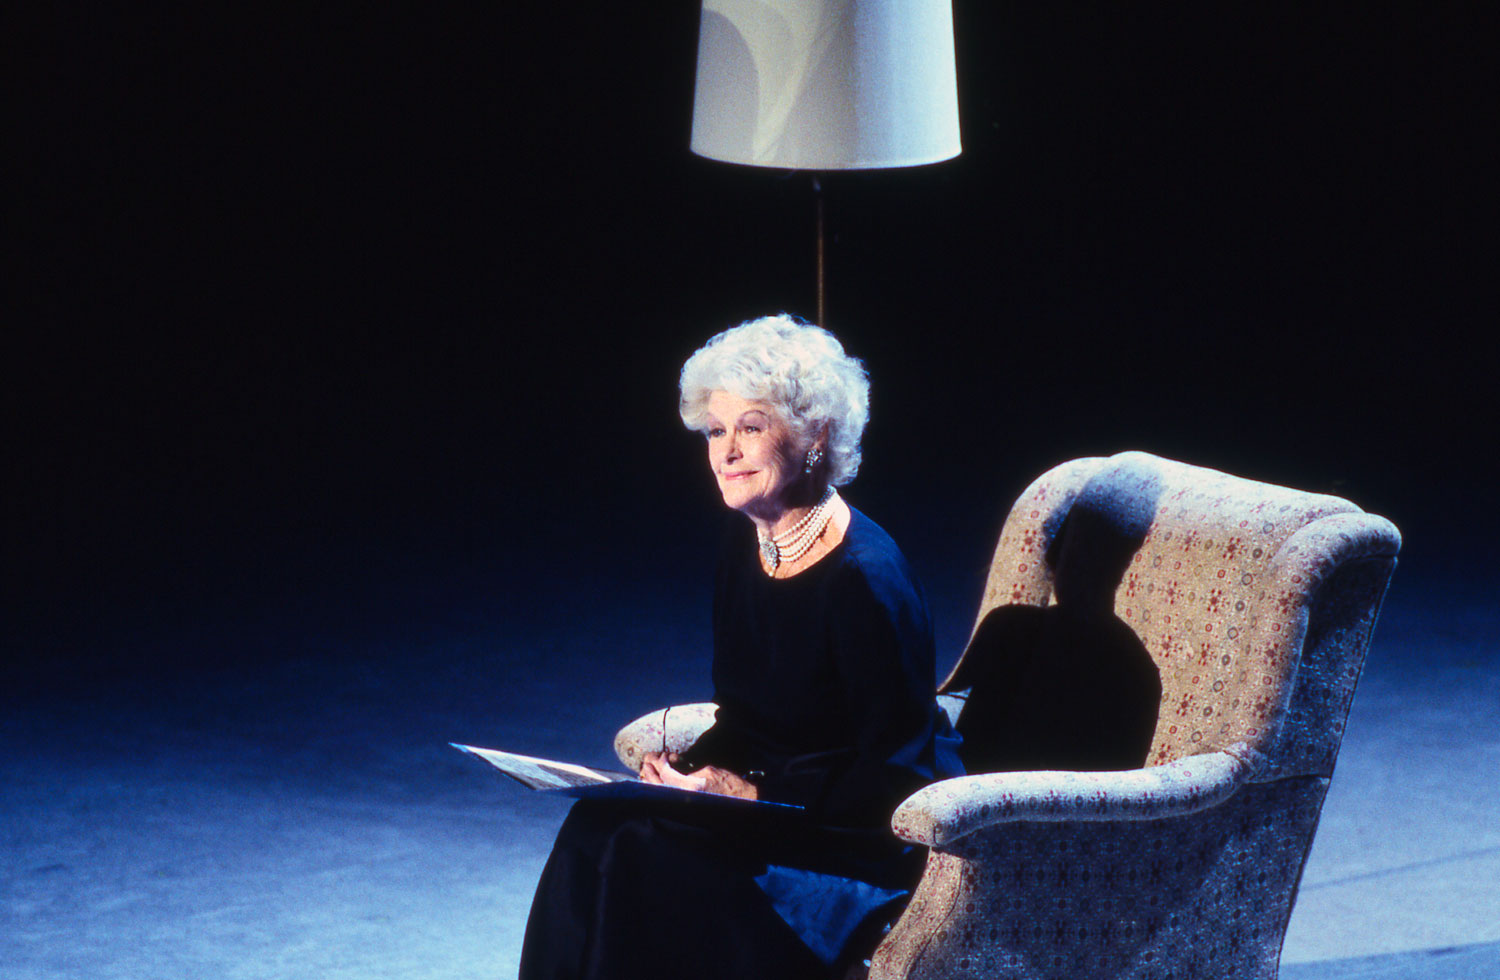 Elaine Stritch performs at the Kennedy Center Honors on October 29, 1994.